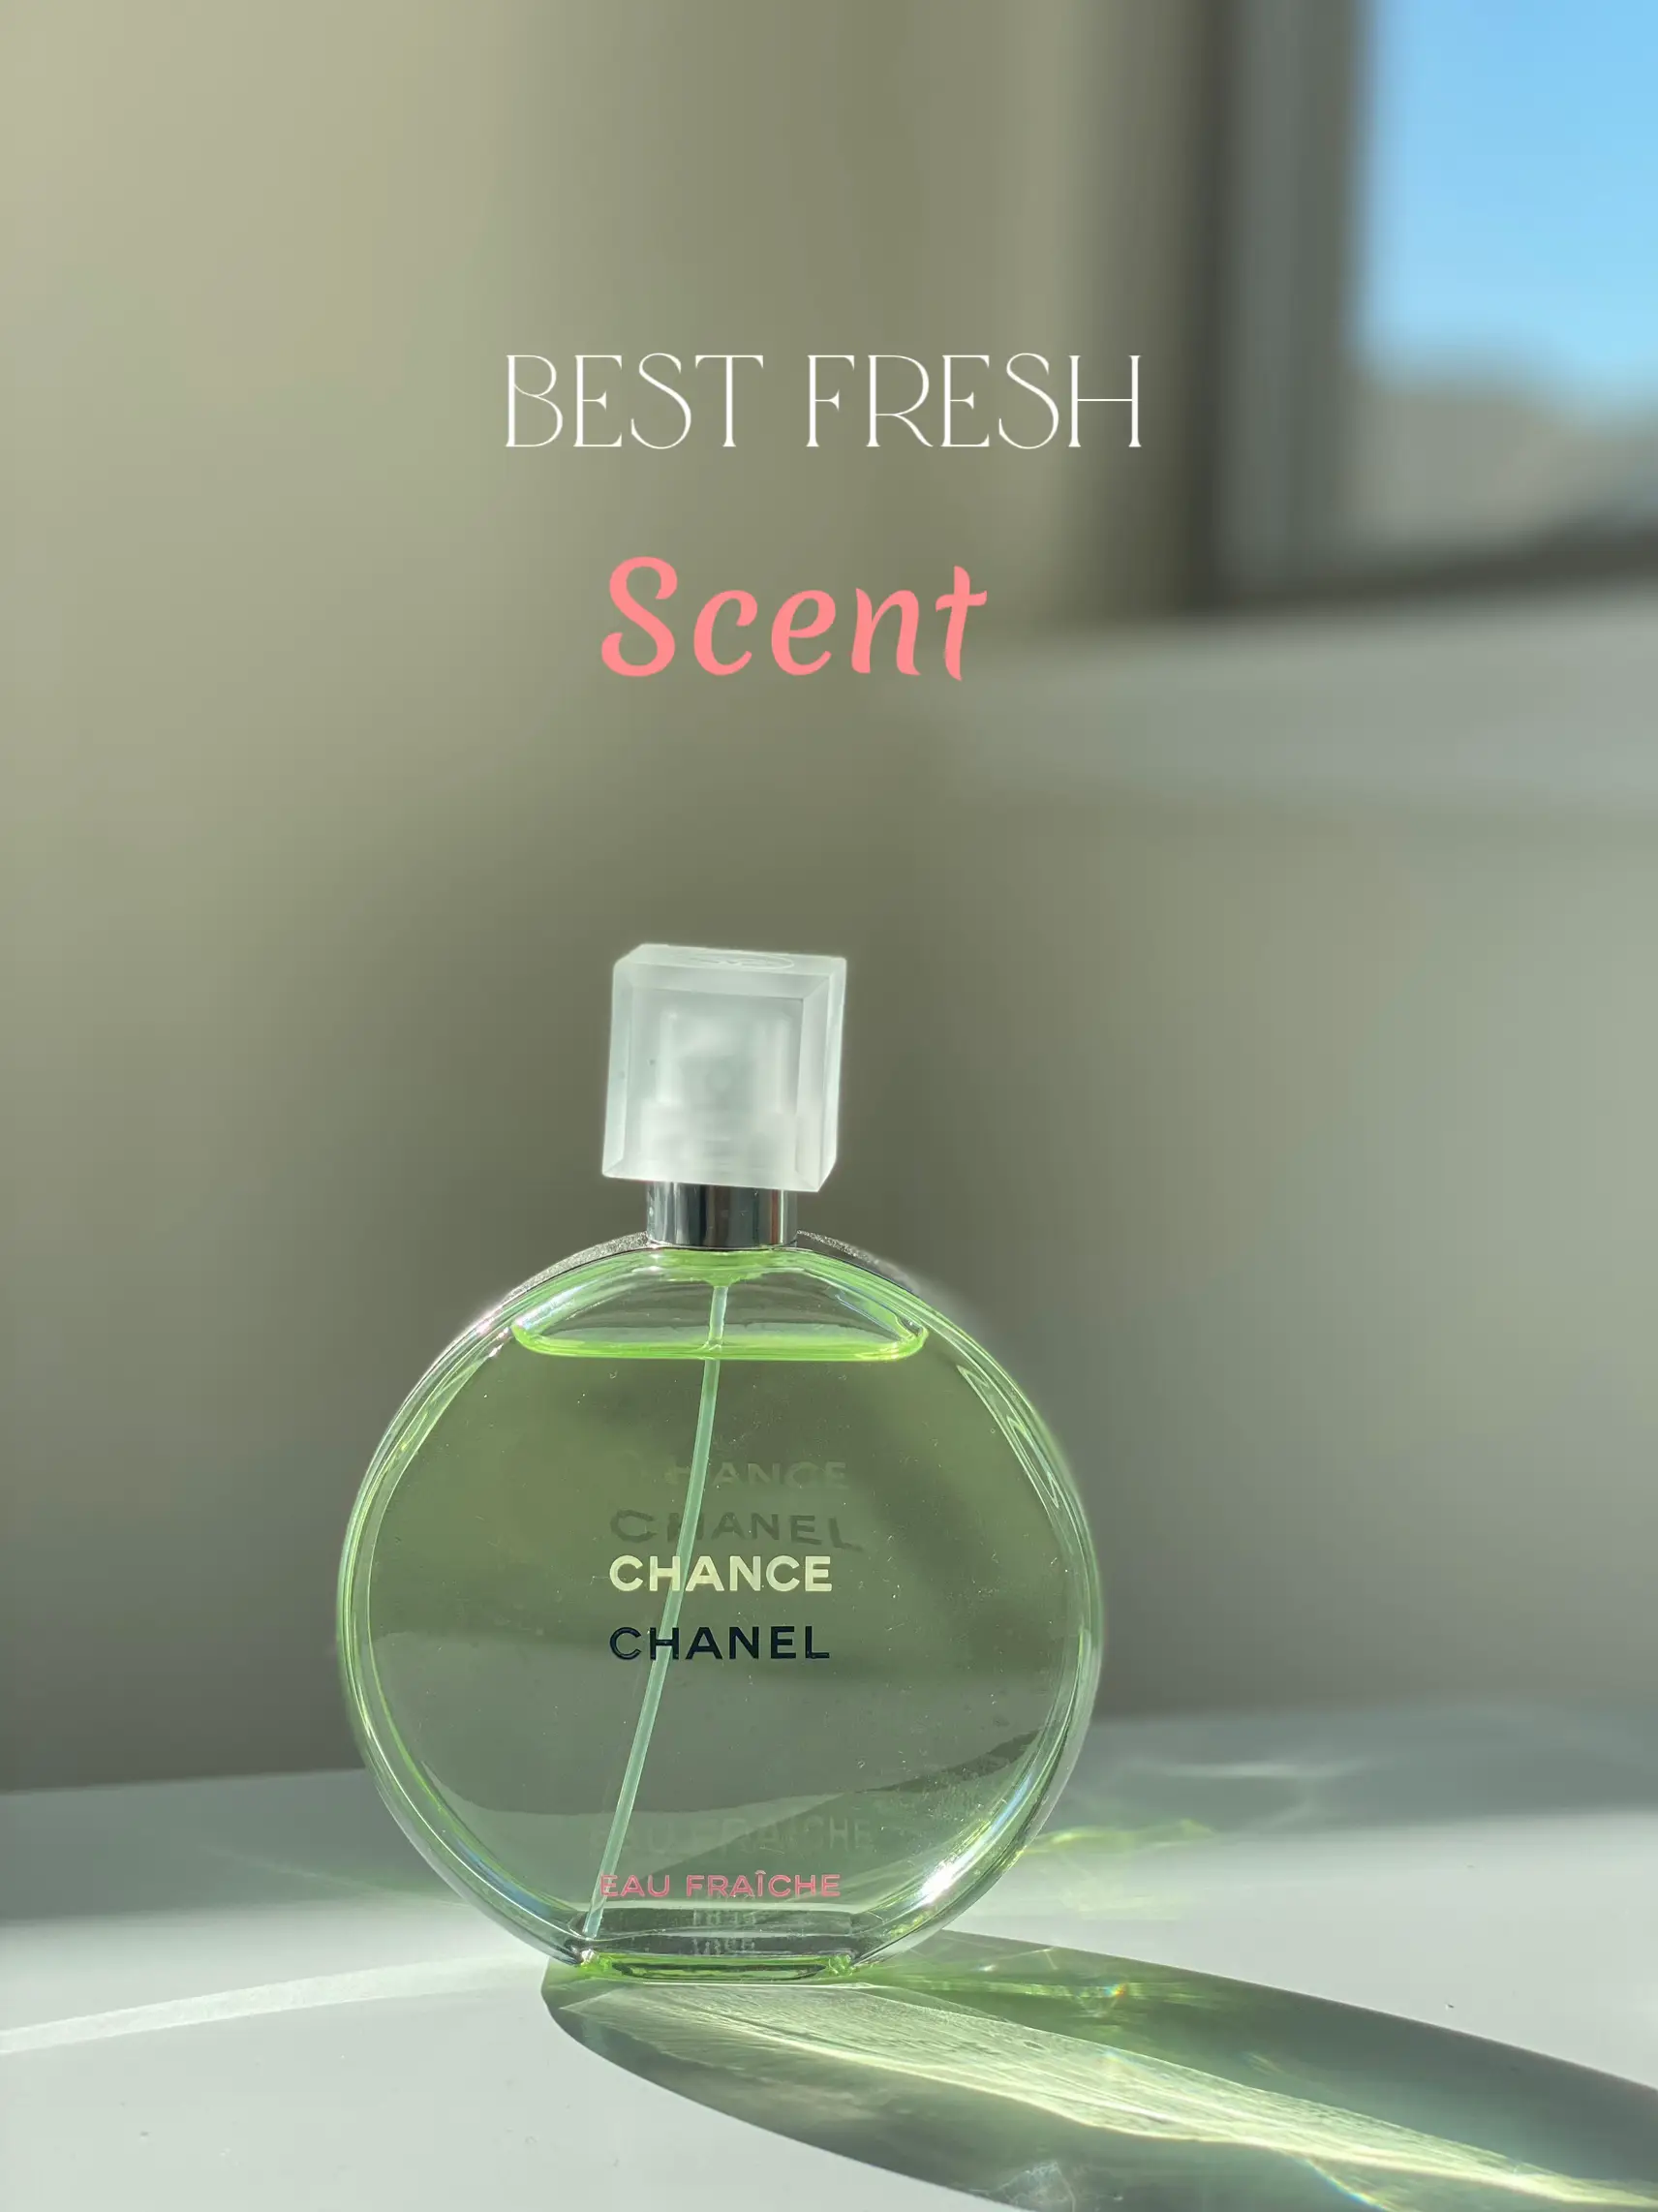 Best Fresh scent from Chanel ✨, Gallery posted by amora 💞